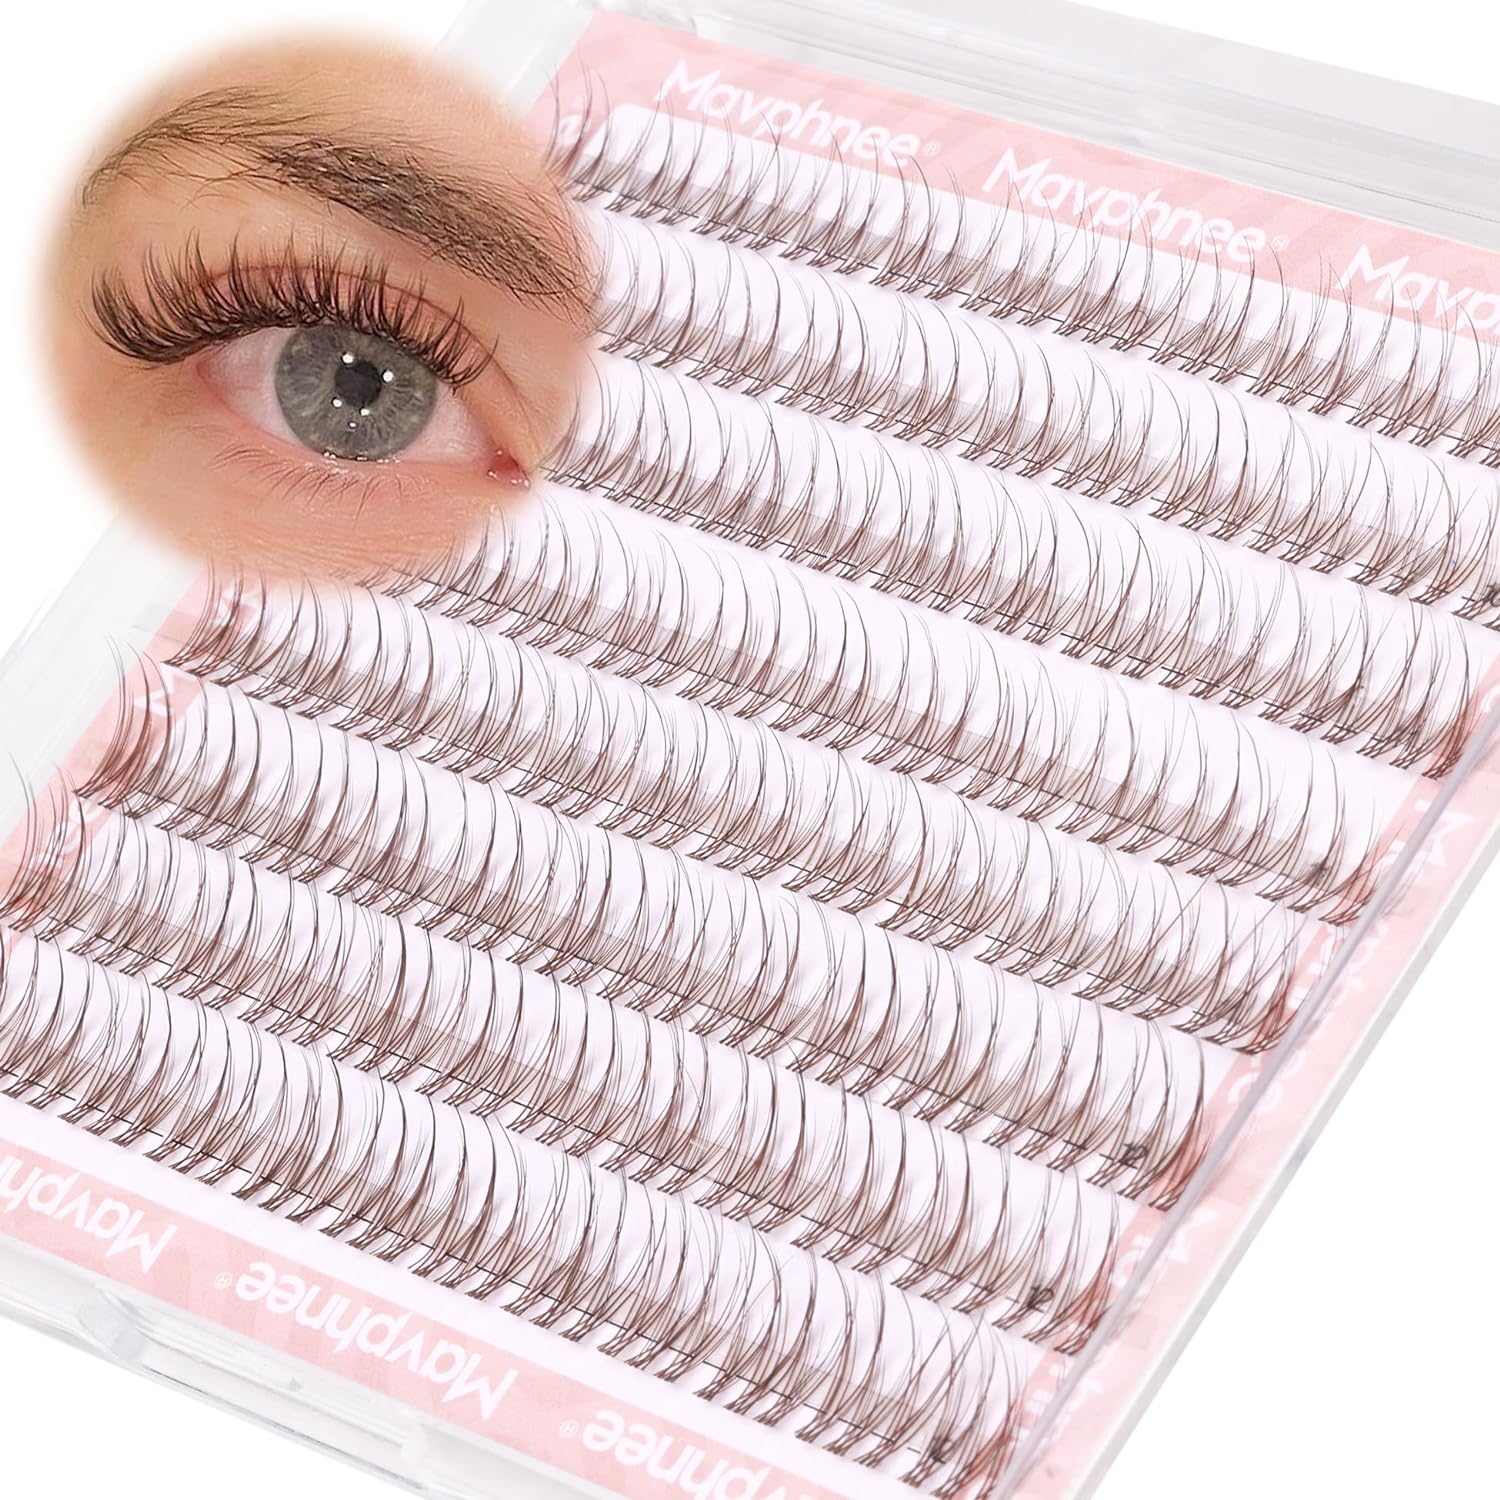 Natural Lash Clusters Brown Lash Extension 96 Pcs Wispy Clear Band Cluster Eyelash Extensions DIY at Home CC Curl Individual Lashes Pack by Mavphnee (10,11,12MM)